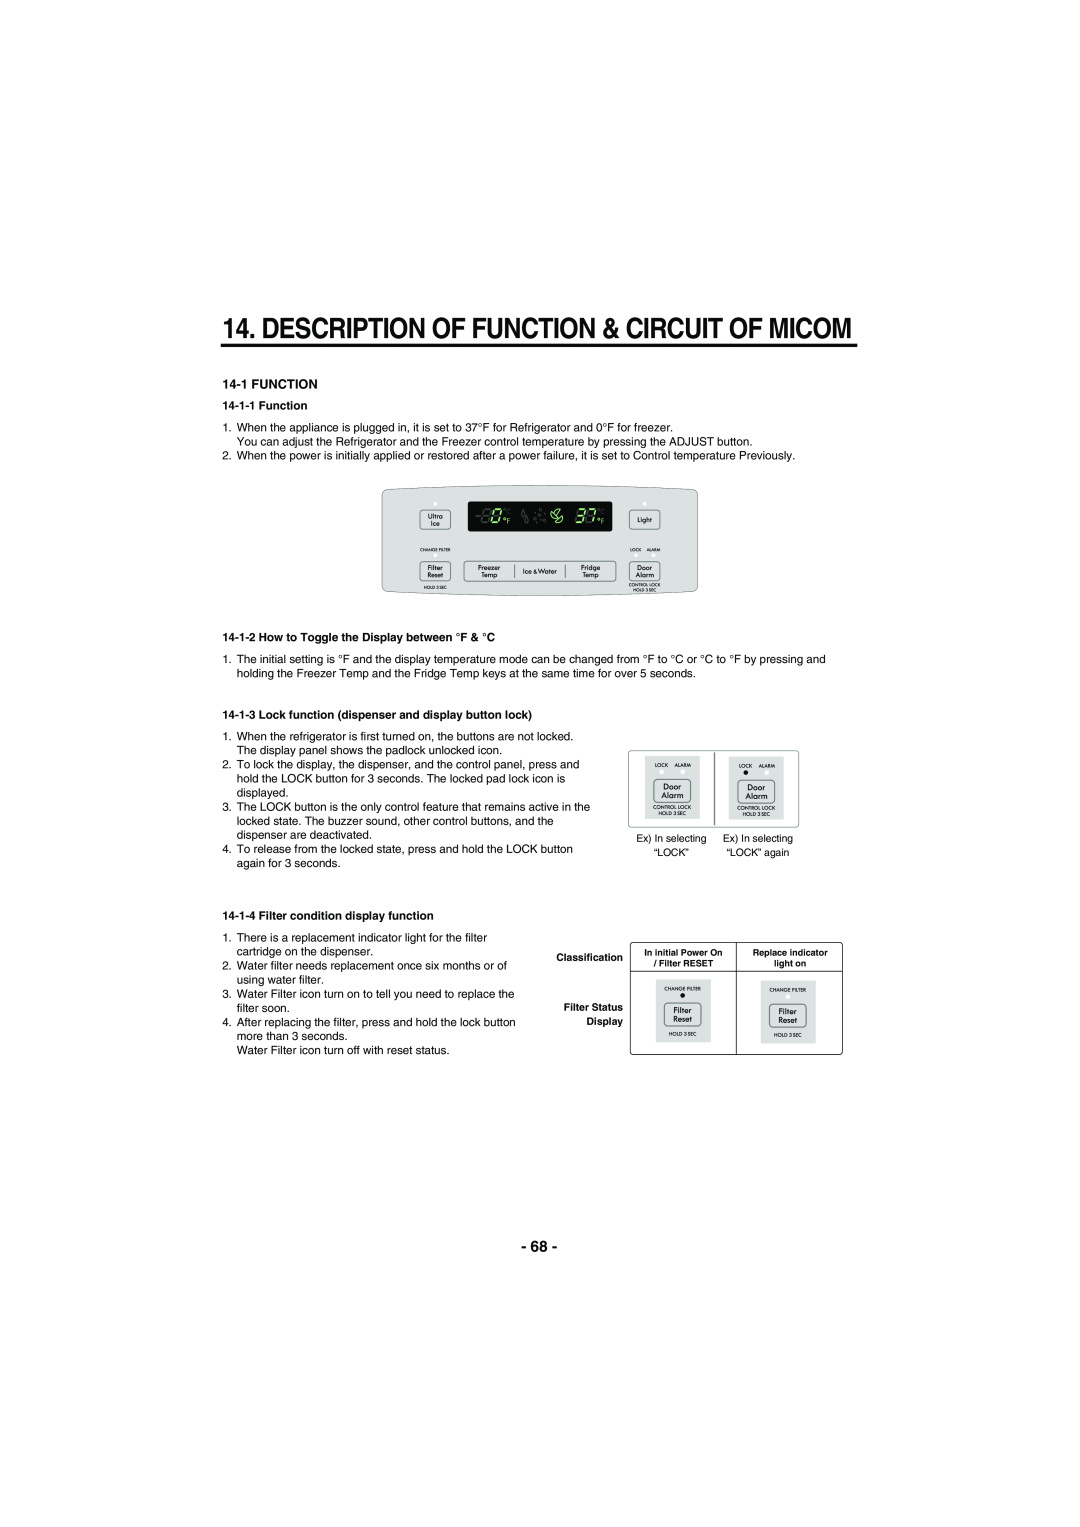 Kenmore 795-71022.010 service manual Description Of Function & Circuit Of Micom, How to Toggle the Display between F & C 